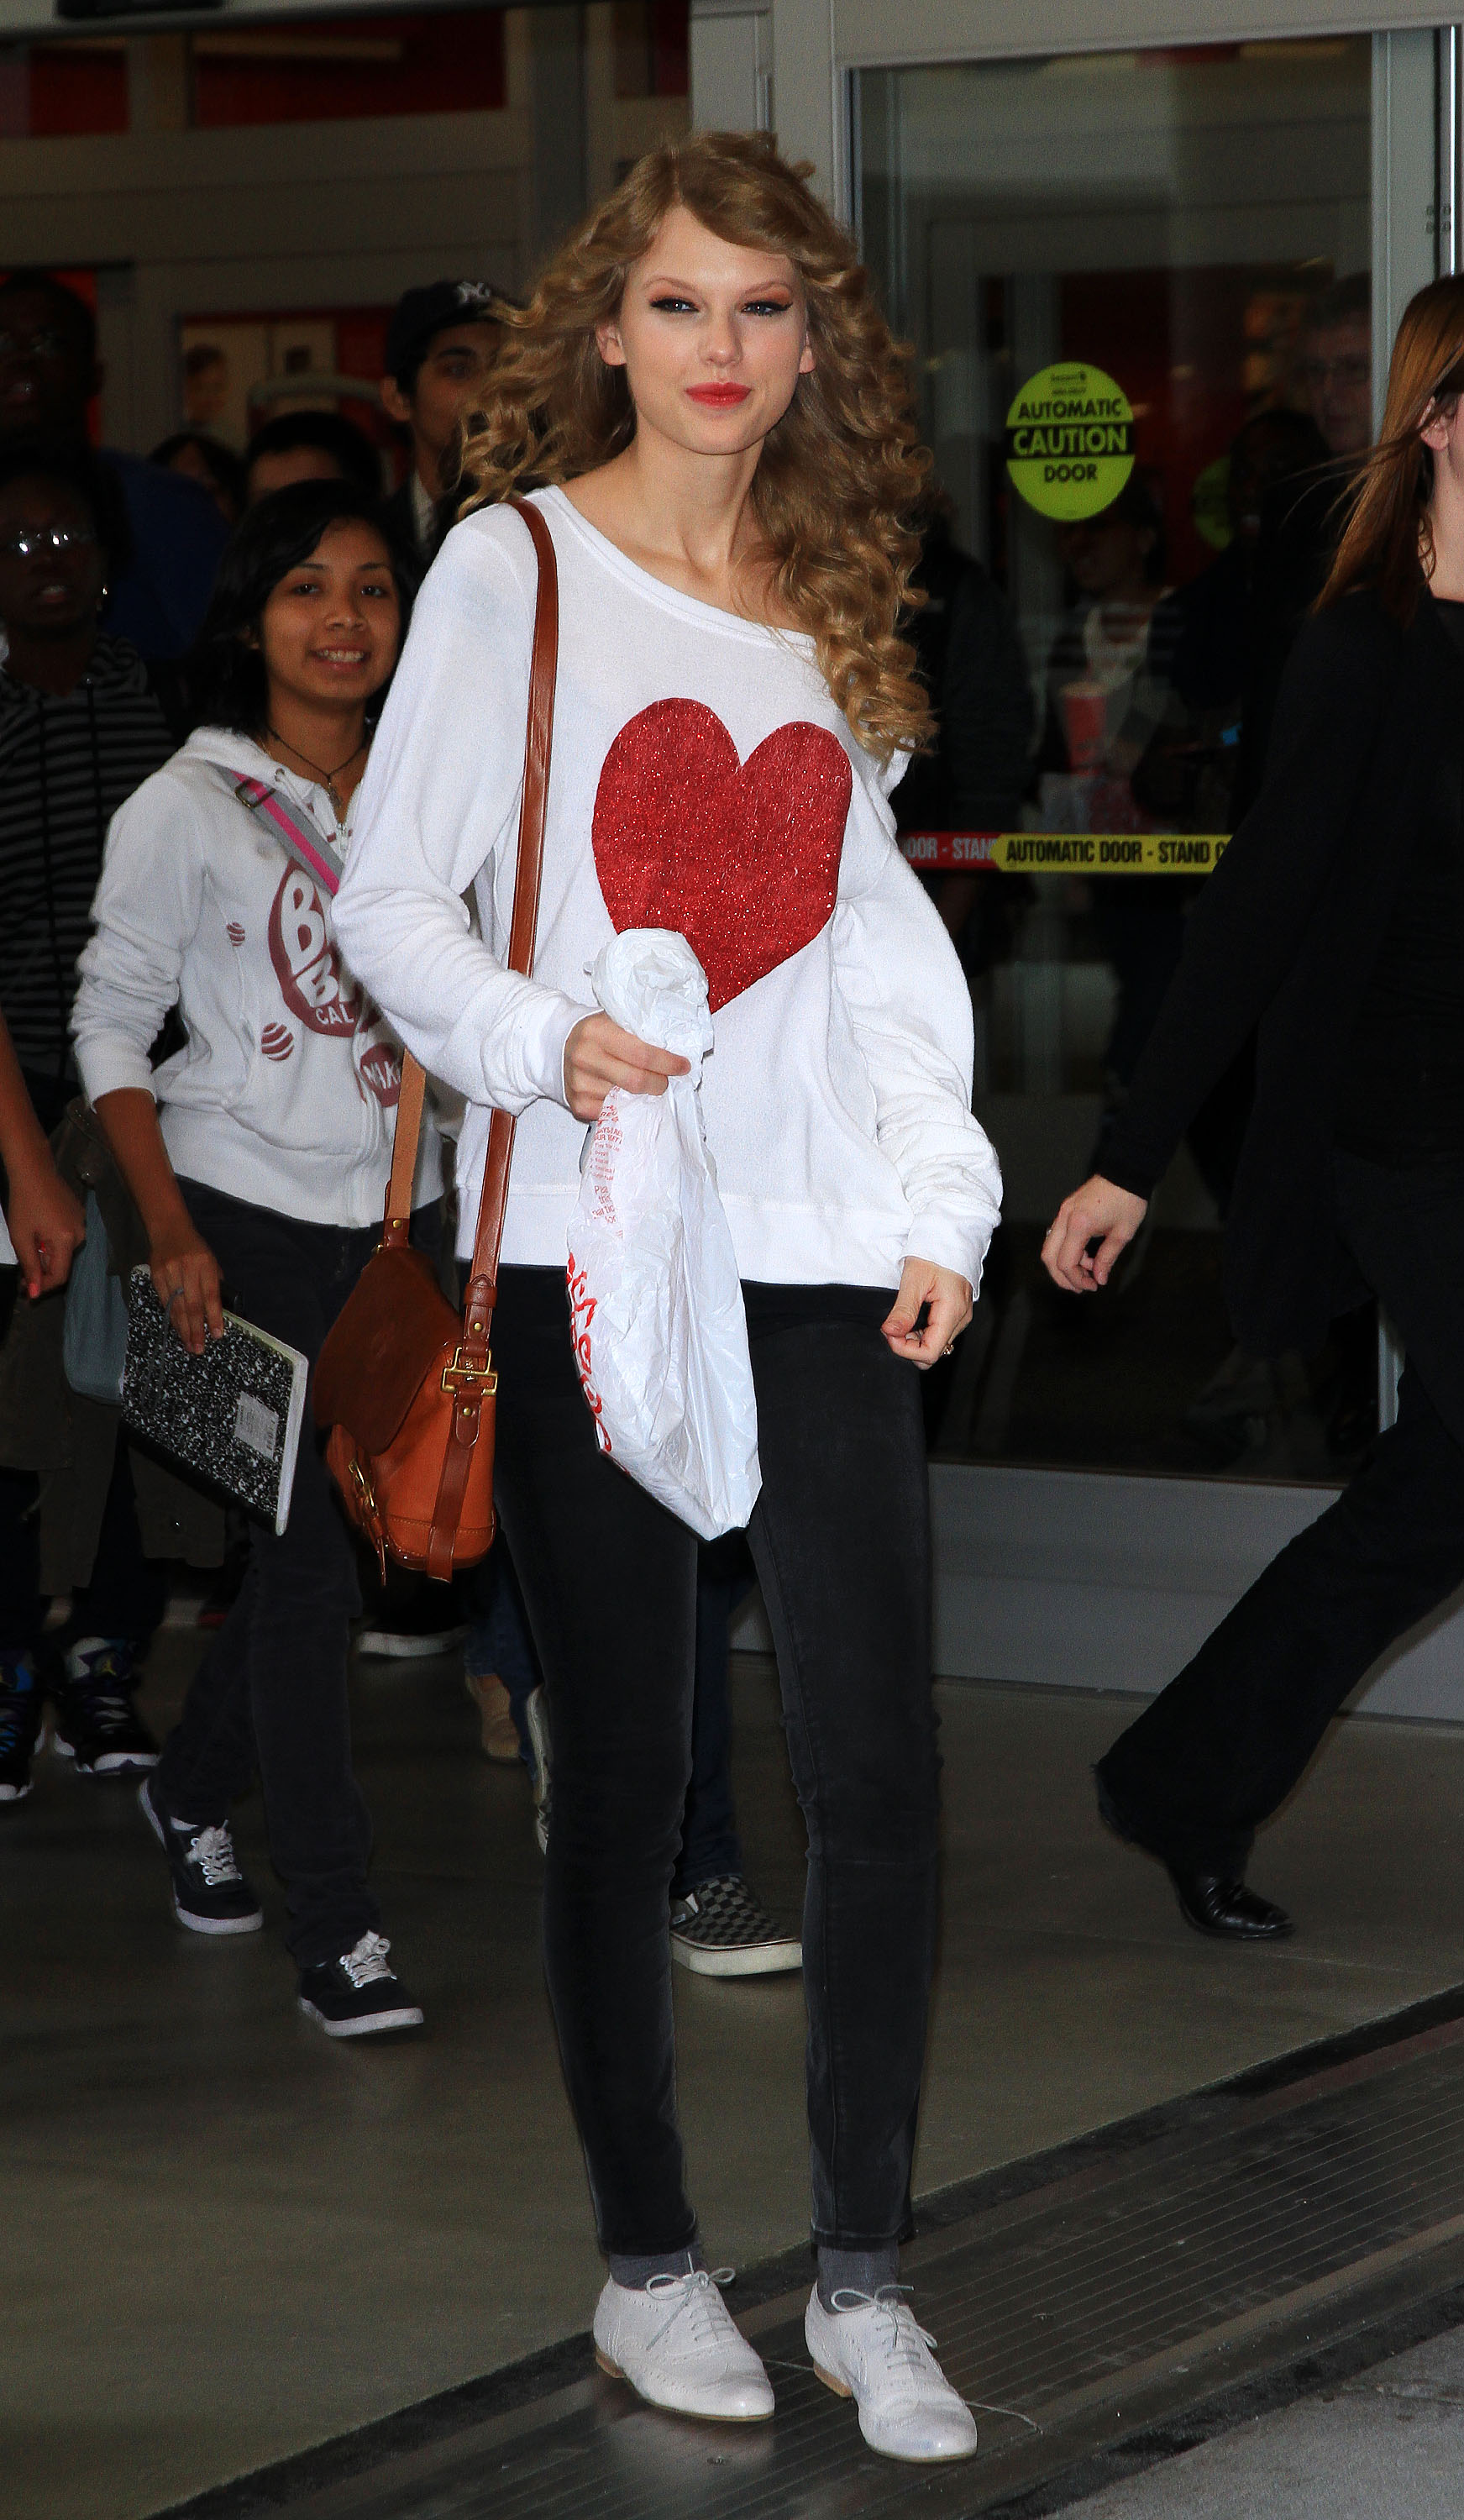 Taylor Swift Buying her album at Target in New York City October 25, 2010 | TAYLOR ...1743 x 3000